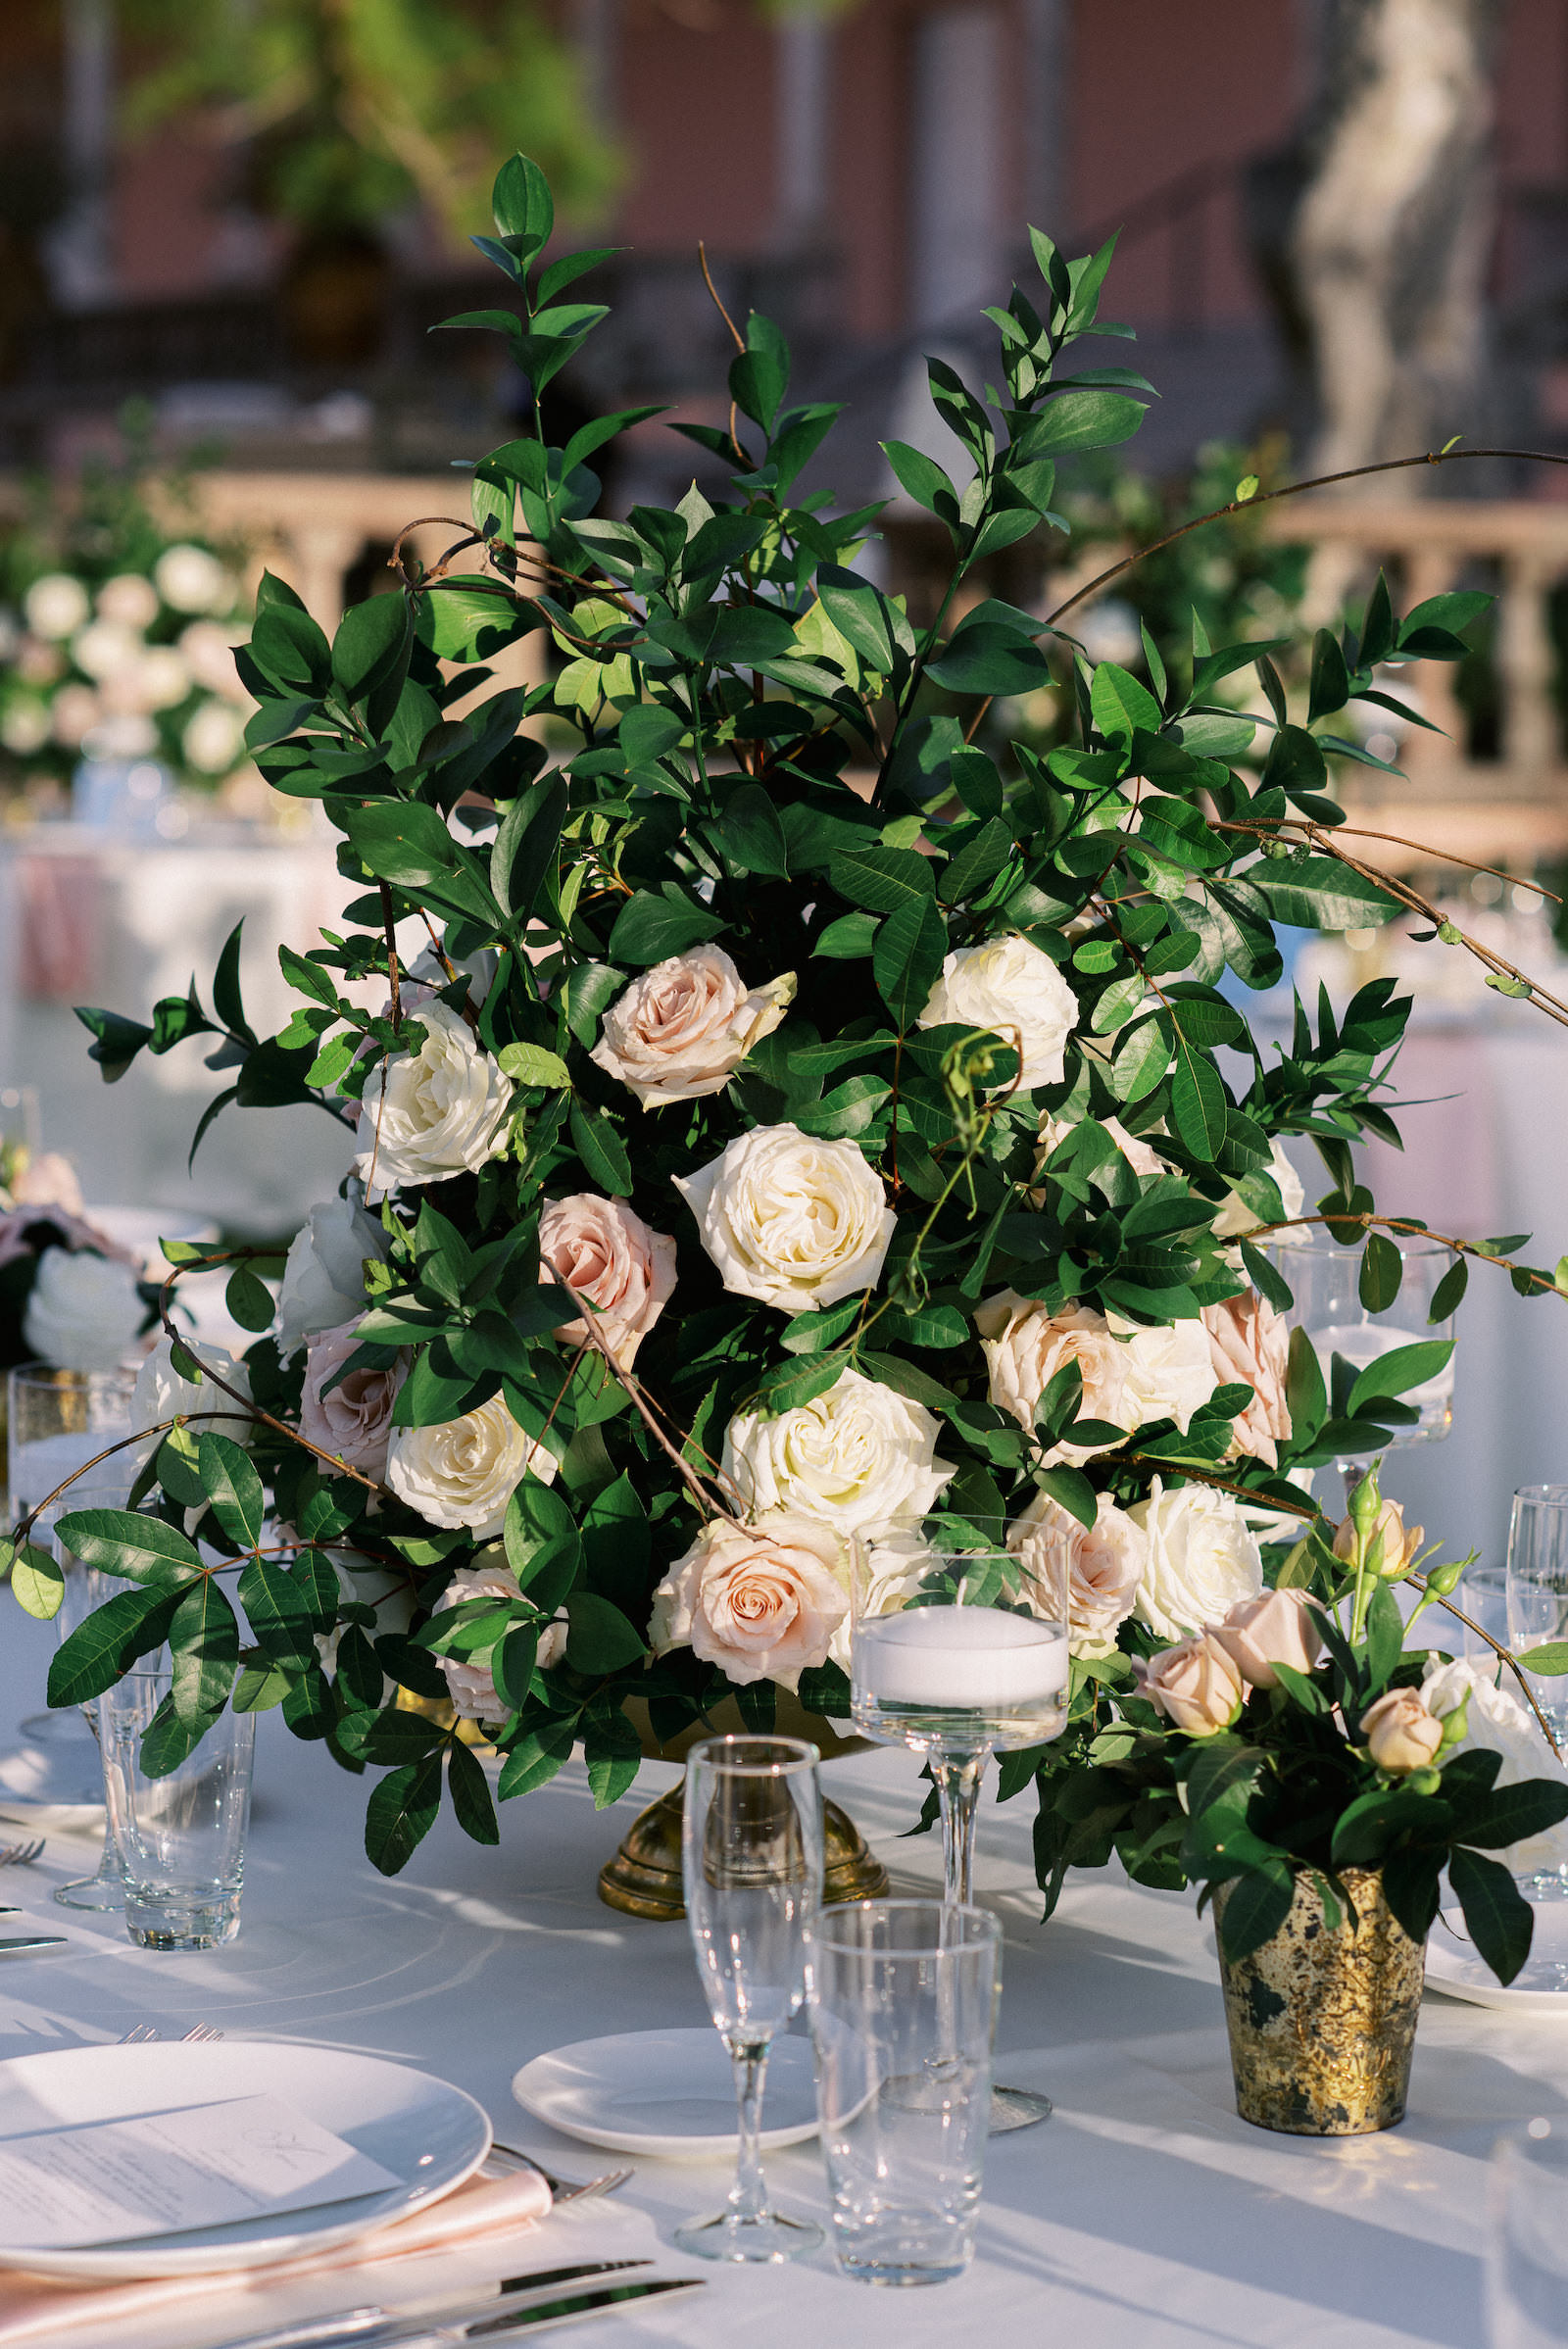 Romantic Garden Inspired Centerpiece, Fairytale Florals with Lush Greenery, Ivory and Blush Pink Roses, Mercury Glass Votive for Stems, Glass Candles | Luxury Florida Wedding Planner NK Weddings